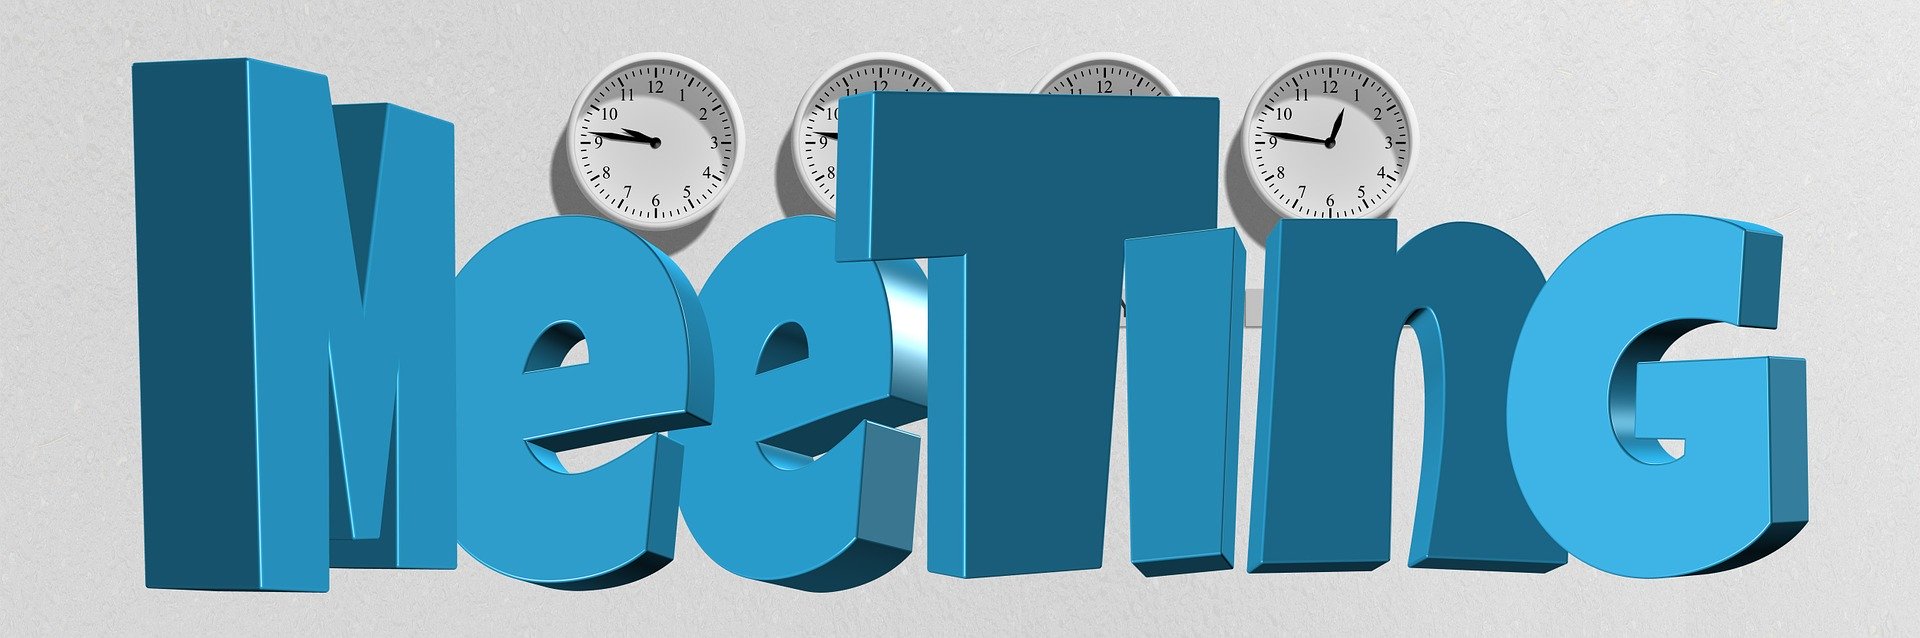 the word meeting in large 3-d block letters in blue with clocks in the background